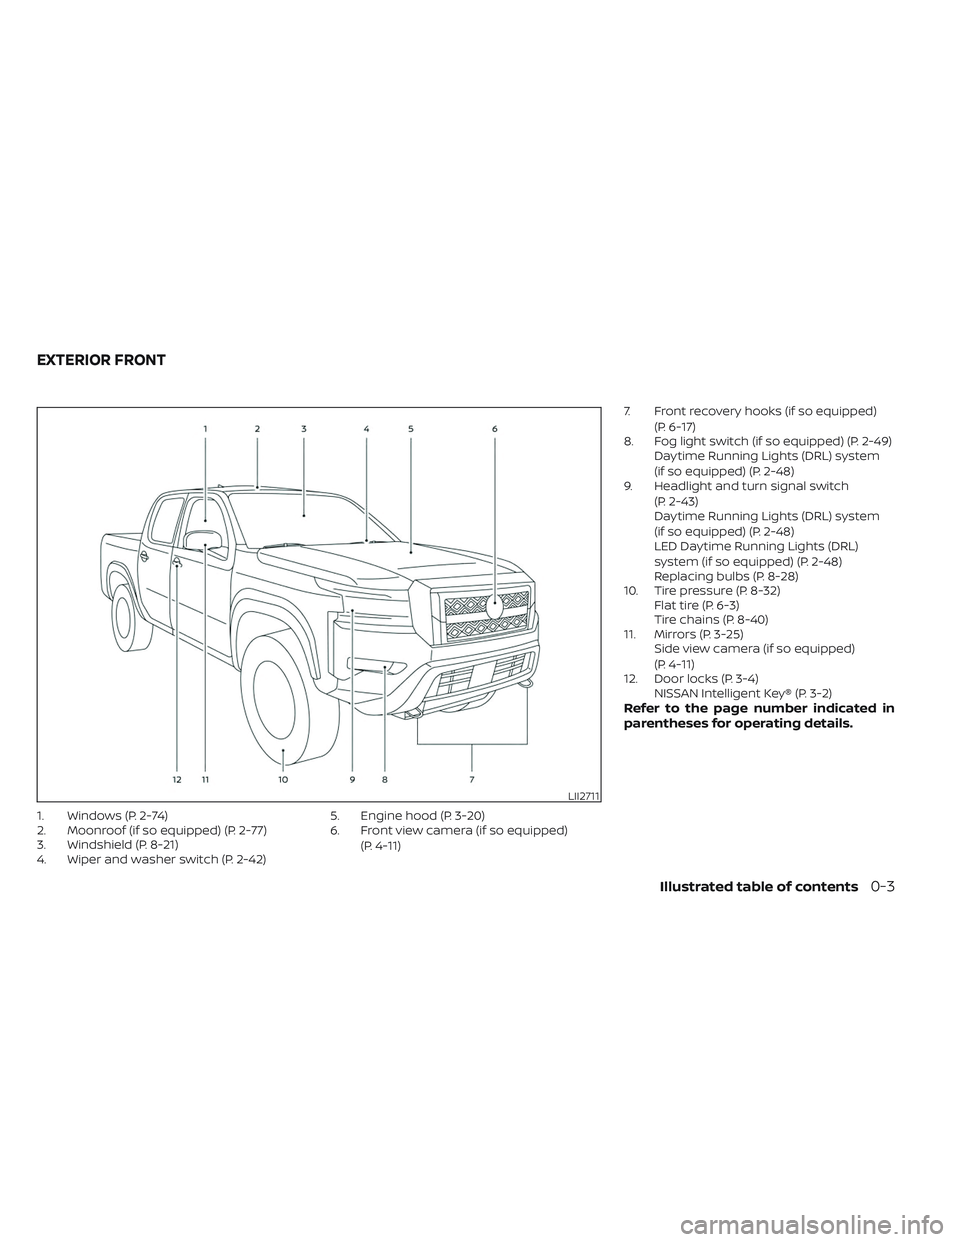 NISSAN FRONTIER 2023  Owners Manual 1. Windows (P. 2-74)
2. Moonroof (if so equipped) (P. 2-77)
3. Windshield (P. 8-21)
4. Wiper and washer switch (P. 2-42)5. Engine hood (P. 3-20)
6. Front view camera (if so equipped)
(P. 4-11) 7. Fron